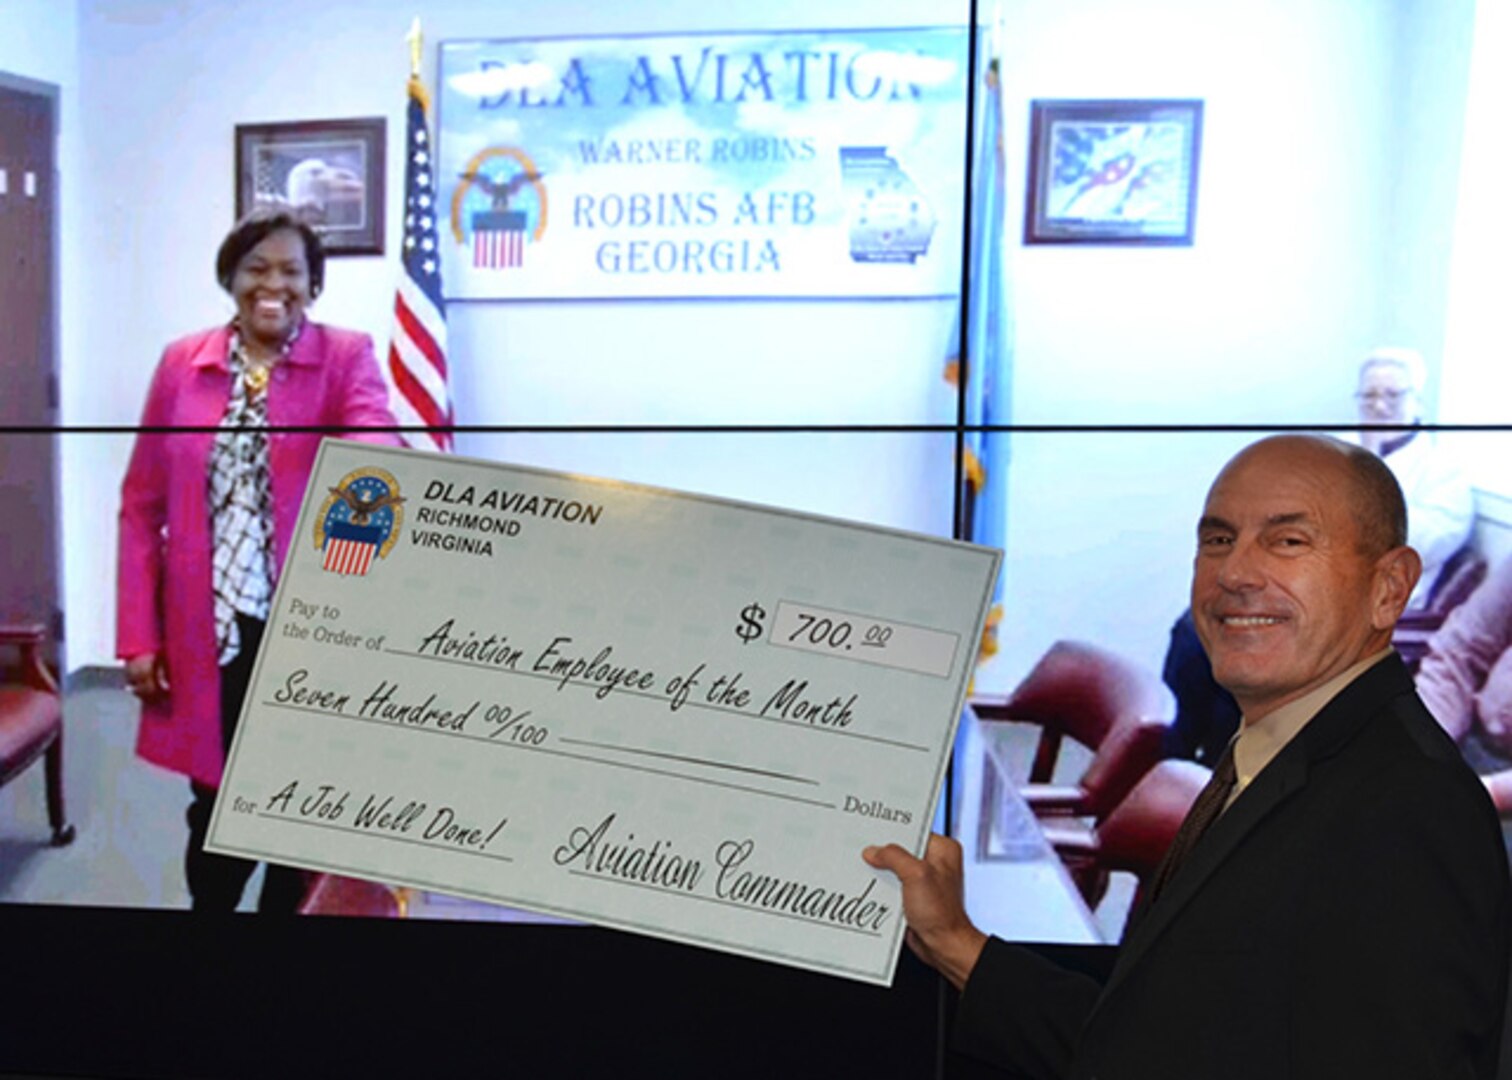 Defense Logistics Agency Aviation's employee Sheila Mills-Lugo was selected as the October Employee of the Month and is being presented the award check in a virtual presentation by DLA Aviation's Deputy Director Charlie Lilli on December 15, 2016 in a ceremony held in Richmond, Virginia.